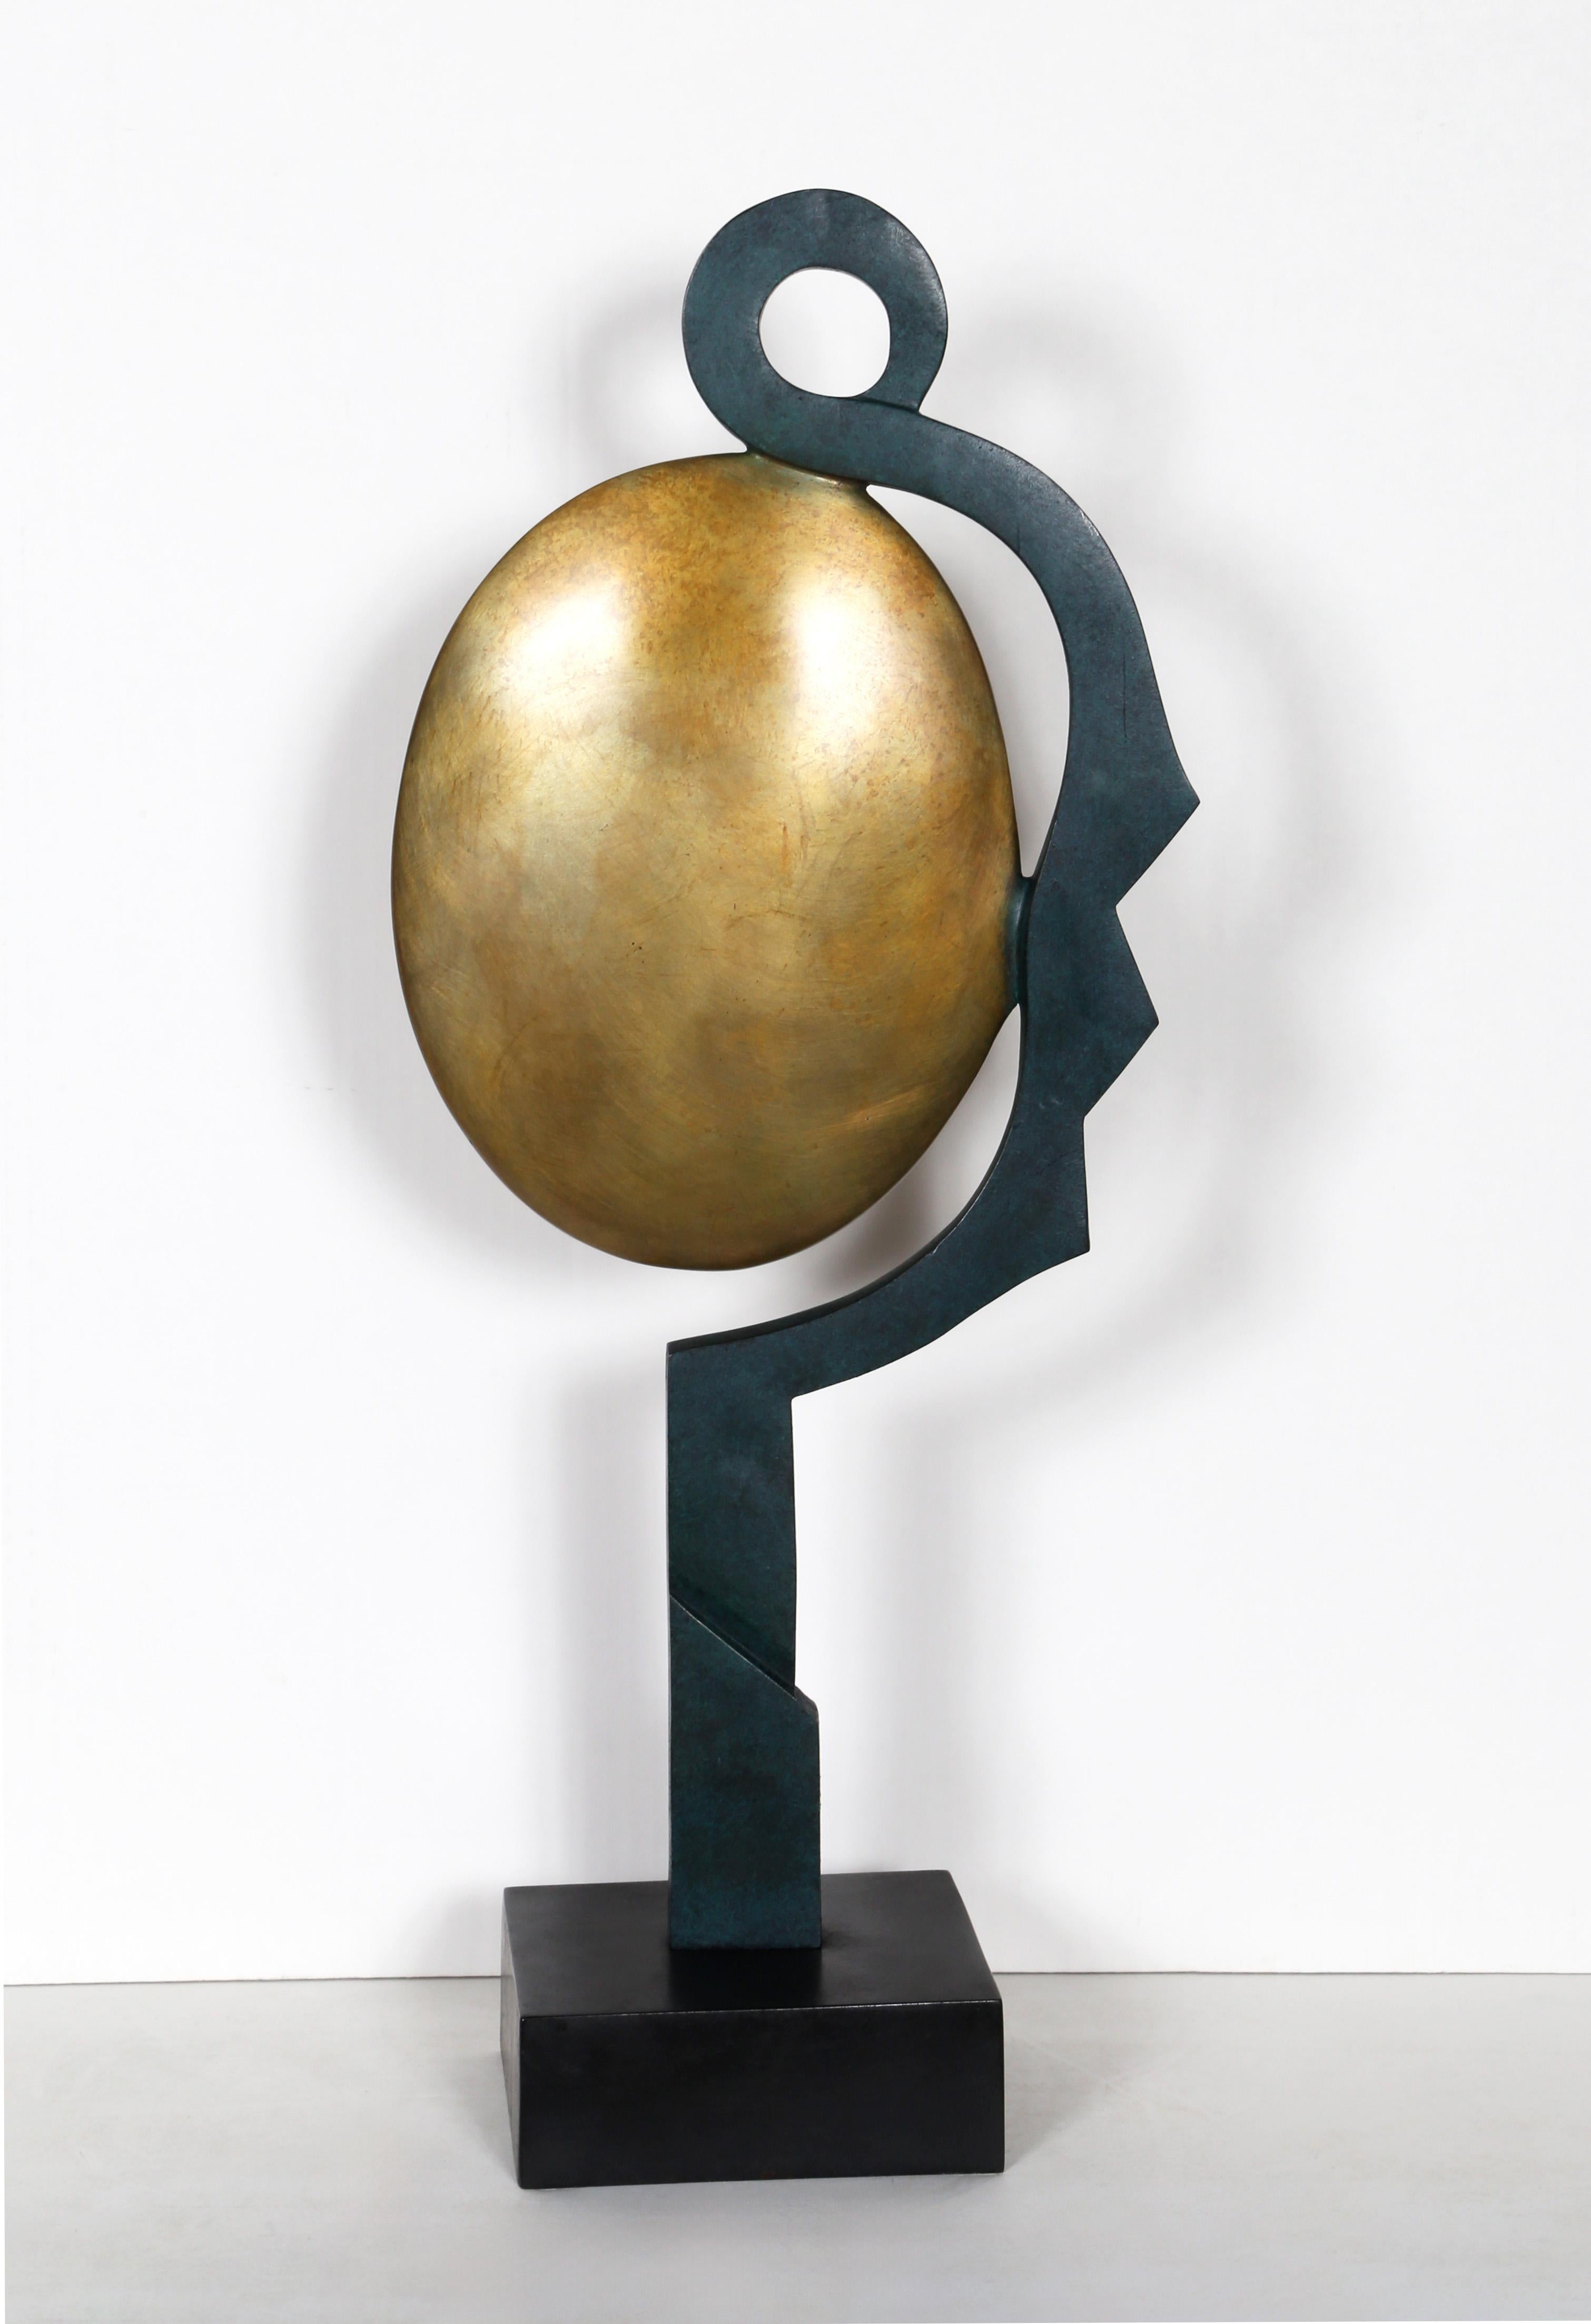 Referenced in Uricariu & Bulat “Antonovici” on page 133, this bronze sculpture by Constantin Antonovici plays on a common shape composition of the artist’s practice. At their core, the Pony Tail Girl sculptures are merely an oval disk suspended